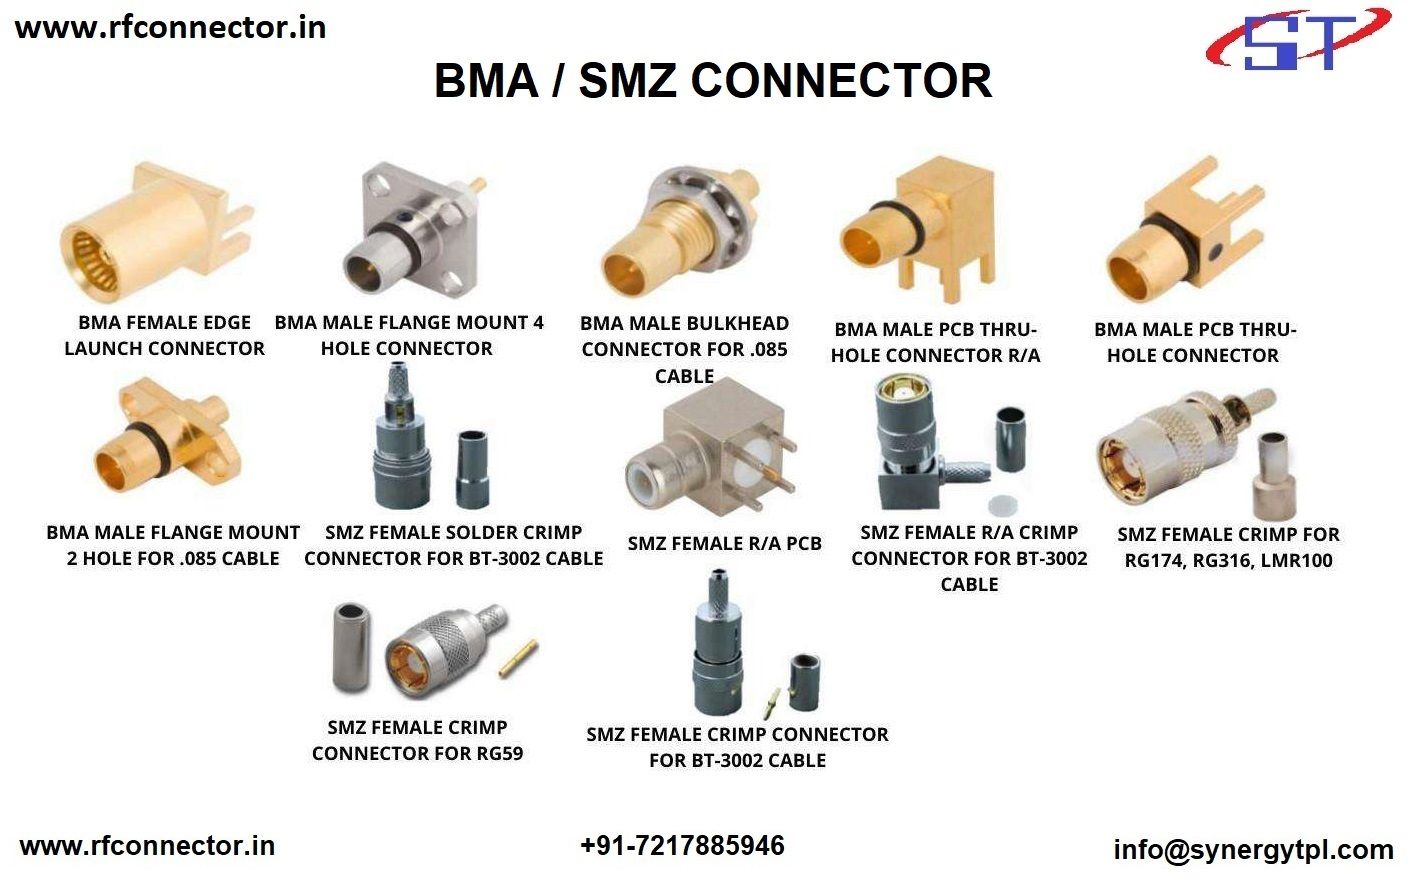 32mm HDPE Duct Coupler